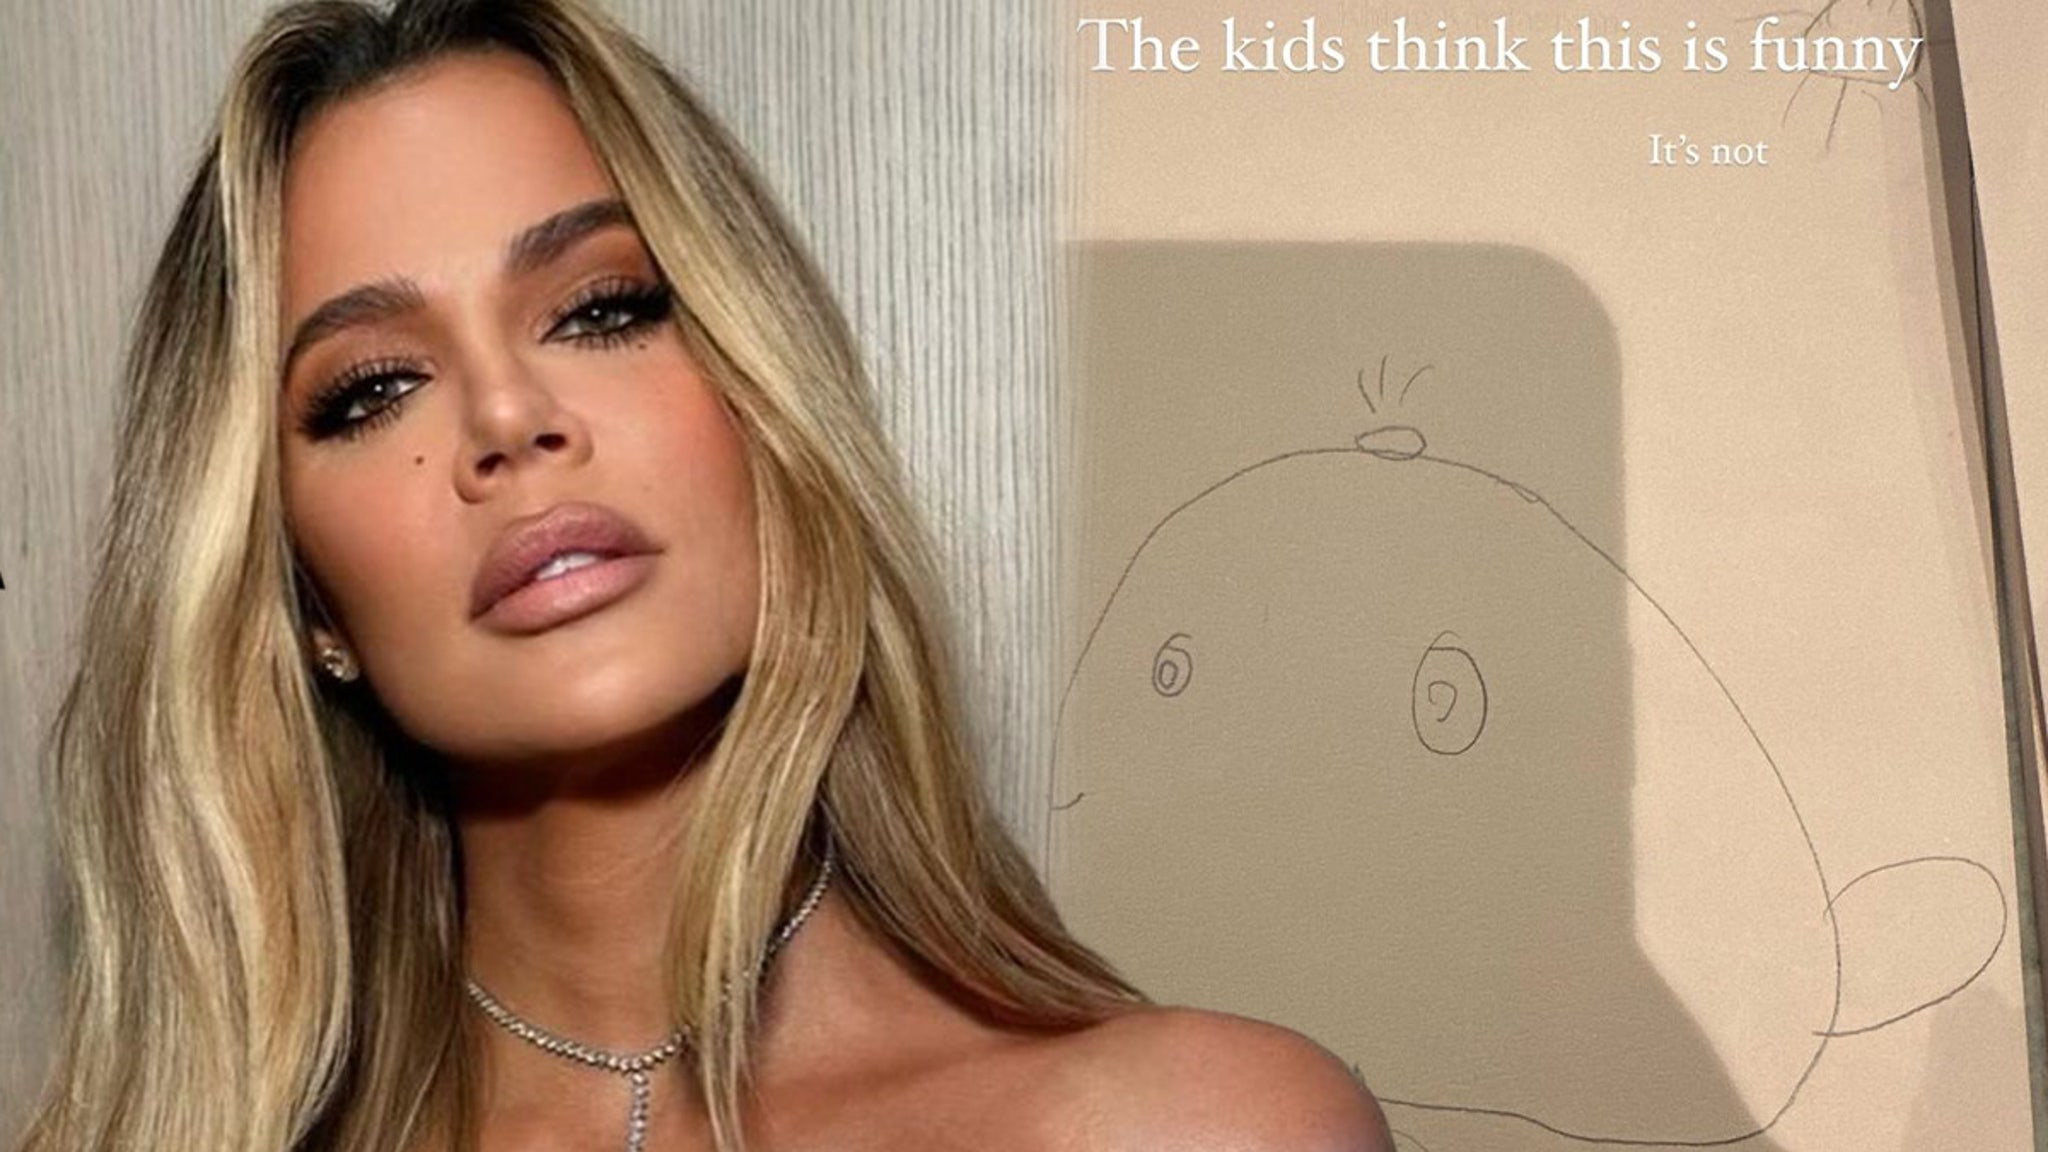 Khloe Kardashian Swears Daughter True Torments Her with Whales For Fun